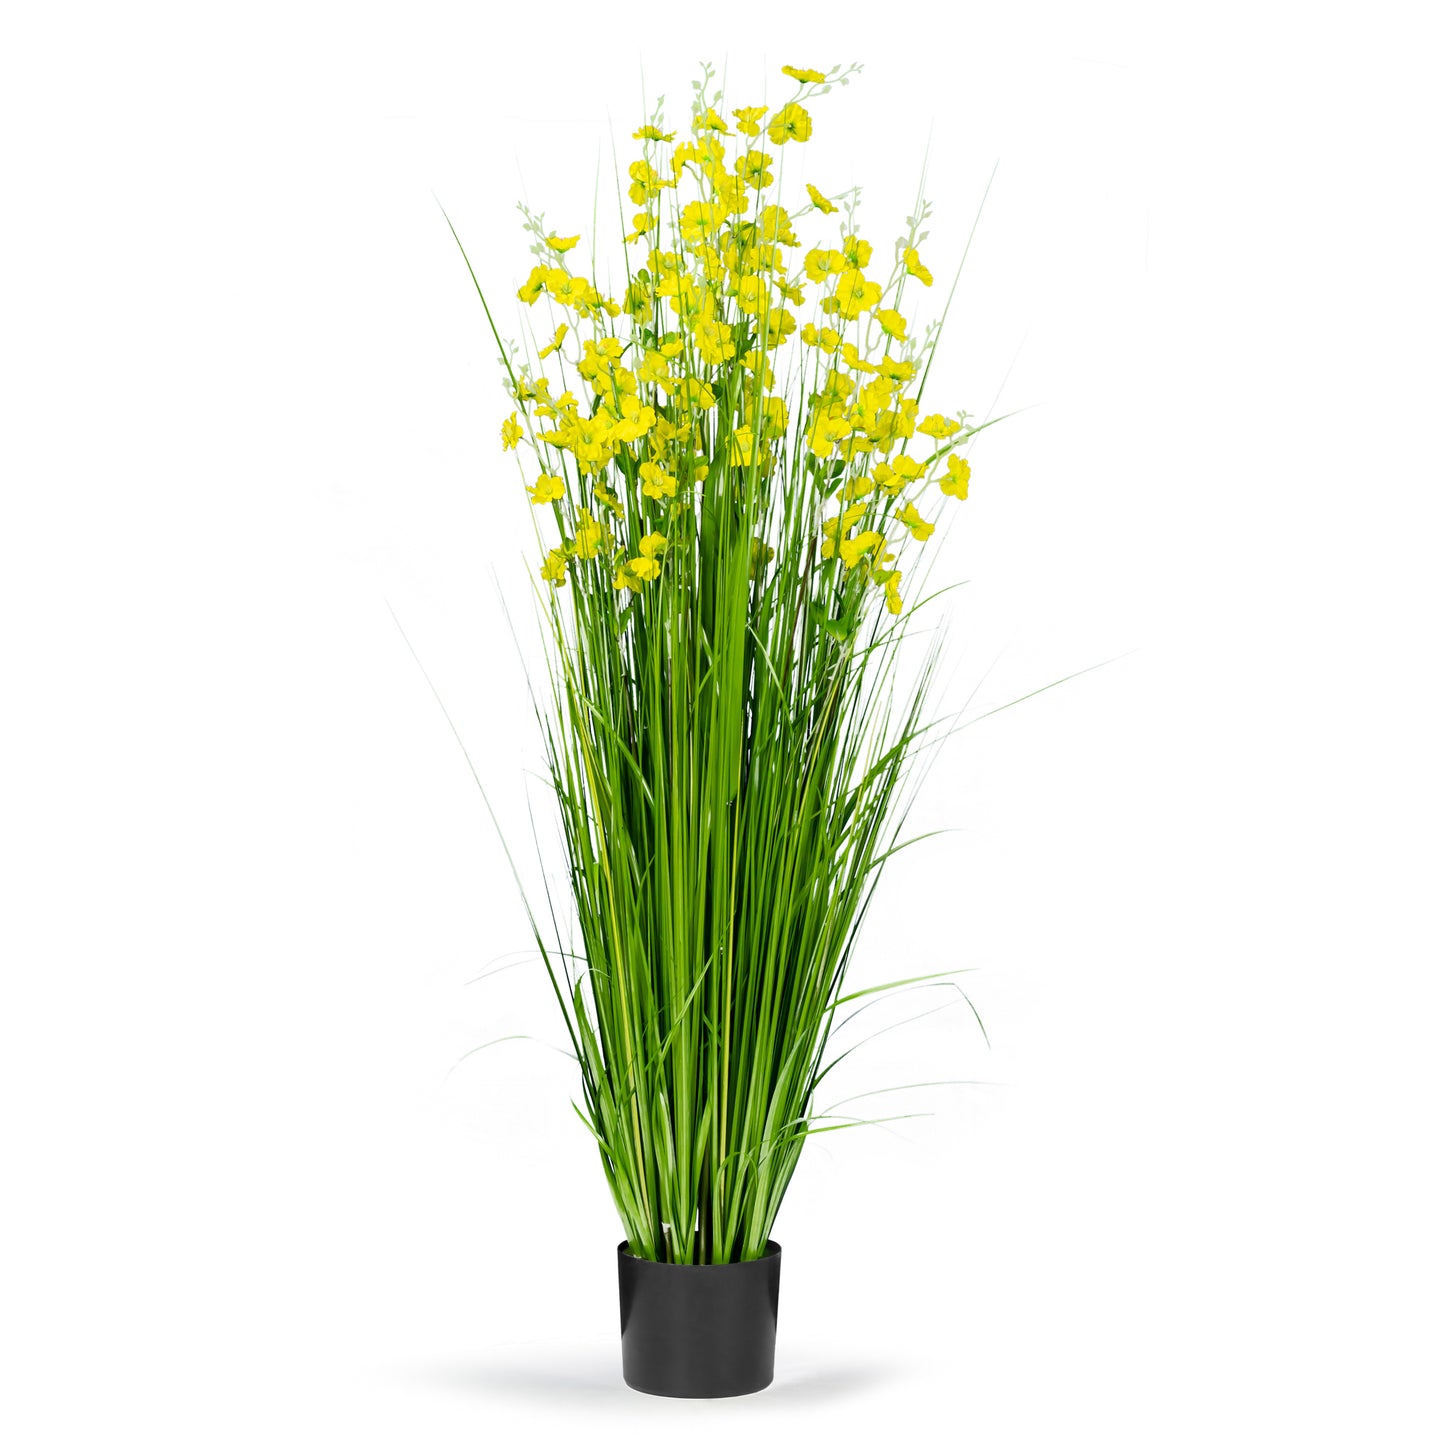 5 Feet High Artificial with Decorative Yellow Flowers